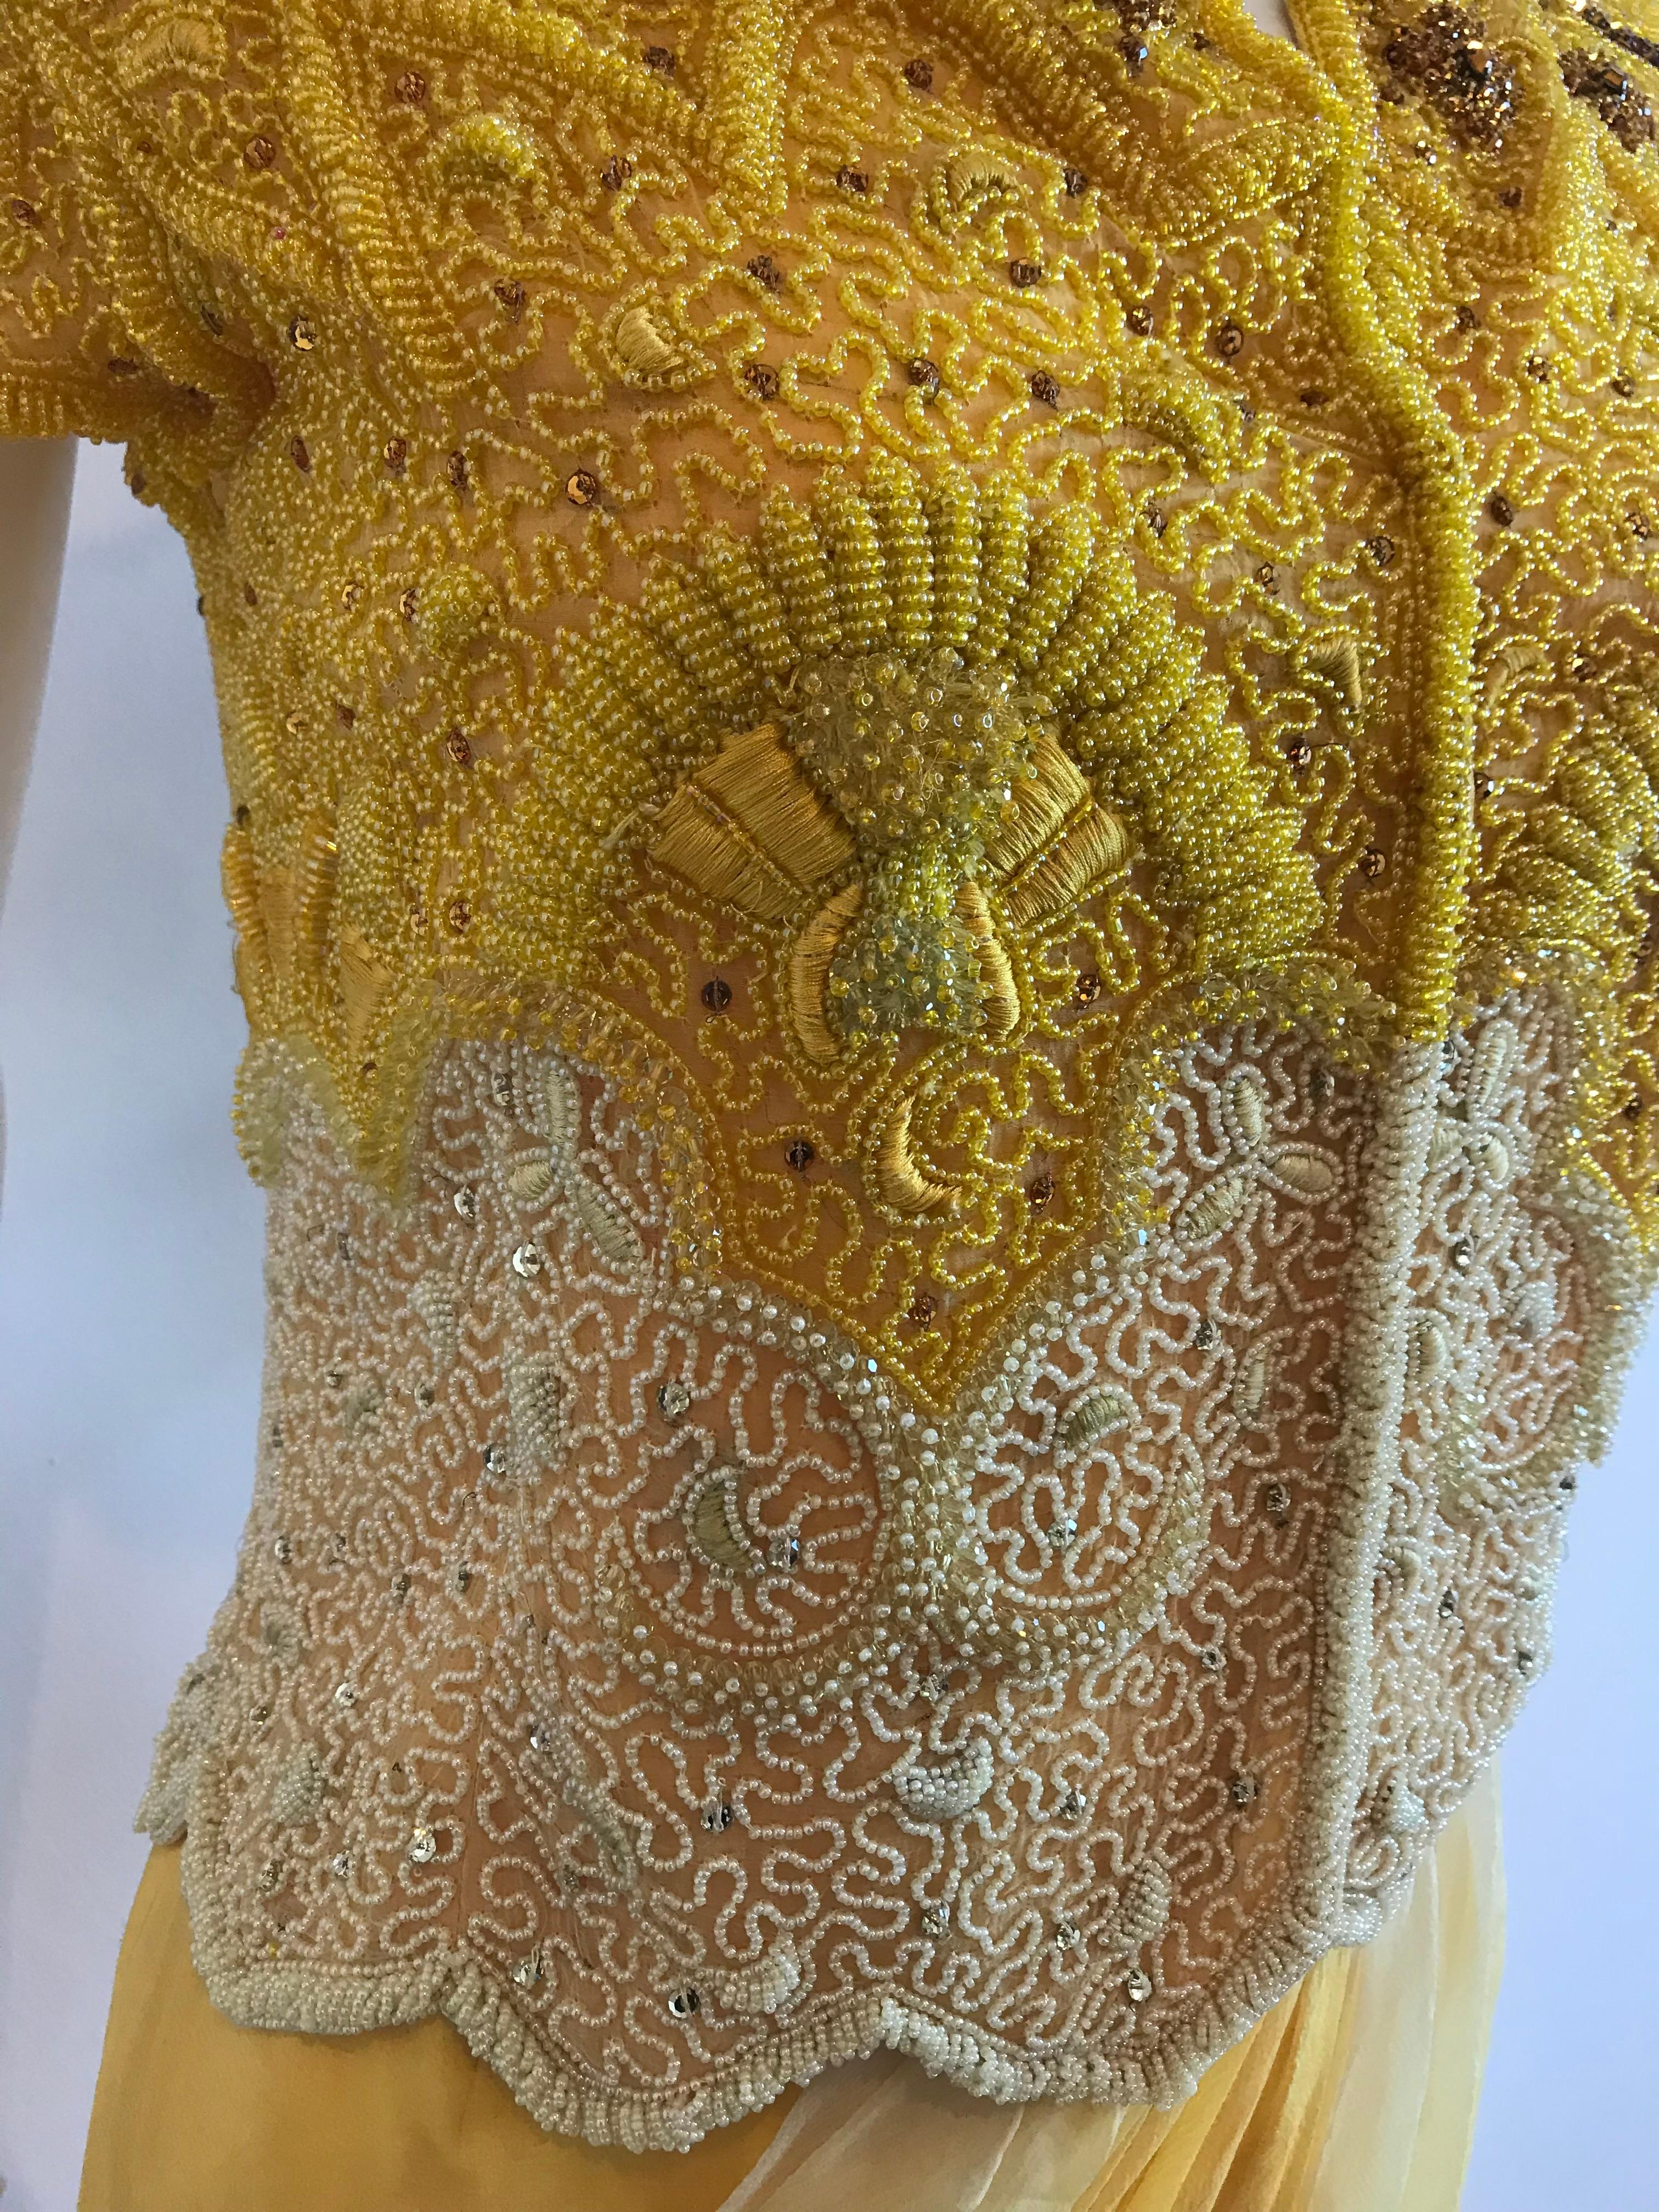 Gianni Versace for Genny Yellow Beaded Jacket and Chiffon Skirt Ensemble In Good Condition For Sale In Brooklyn, NY